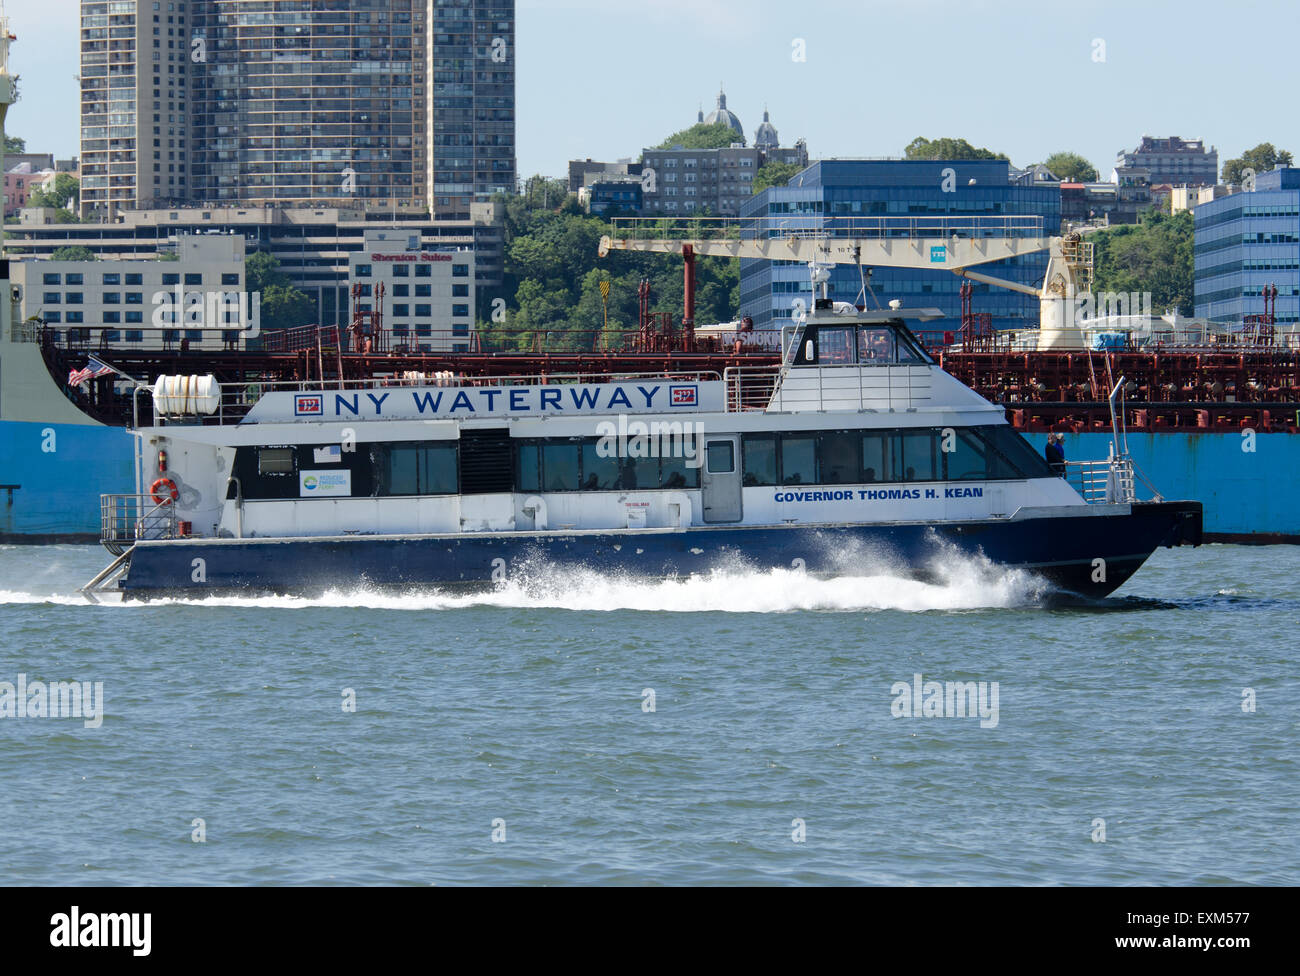 NY Waterway Ferry bateau "le gouverneur Thomas H. Kean' catamaran grande vitesse, Haverstraw-Ferry Ossining, Hudson River, New York, NY Banque D'Images